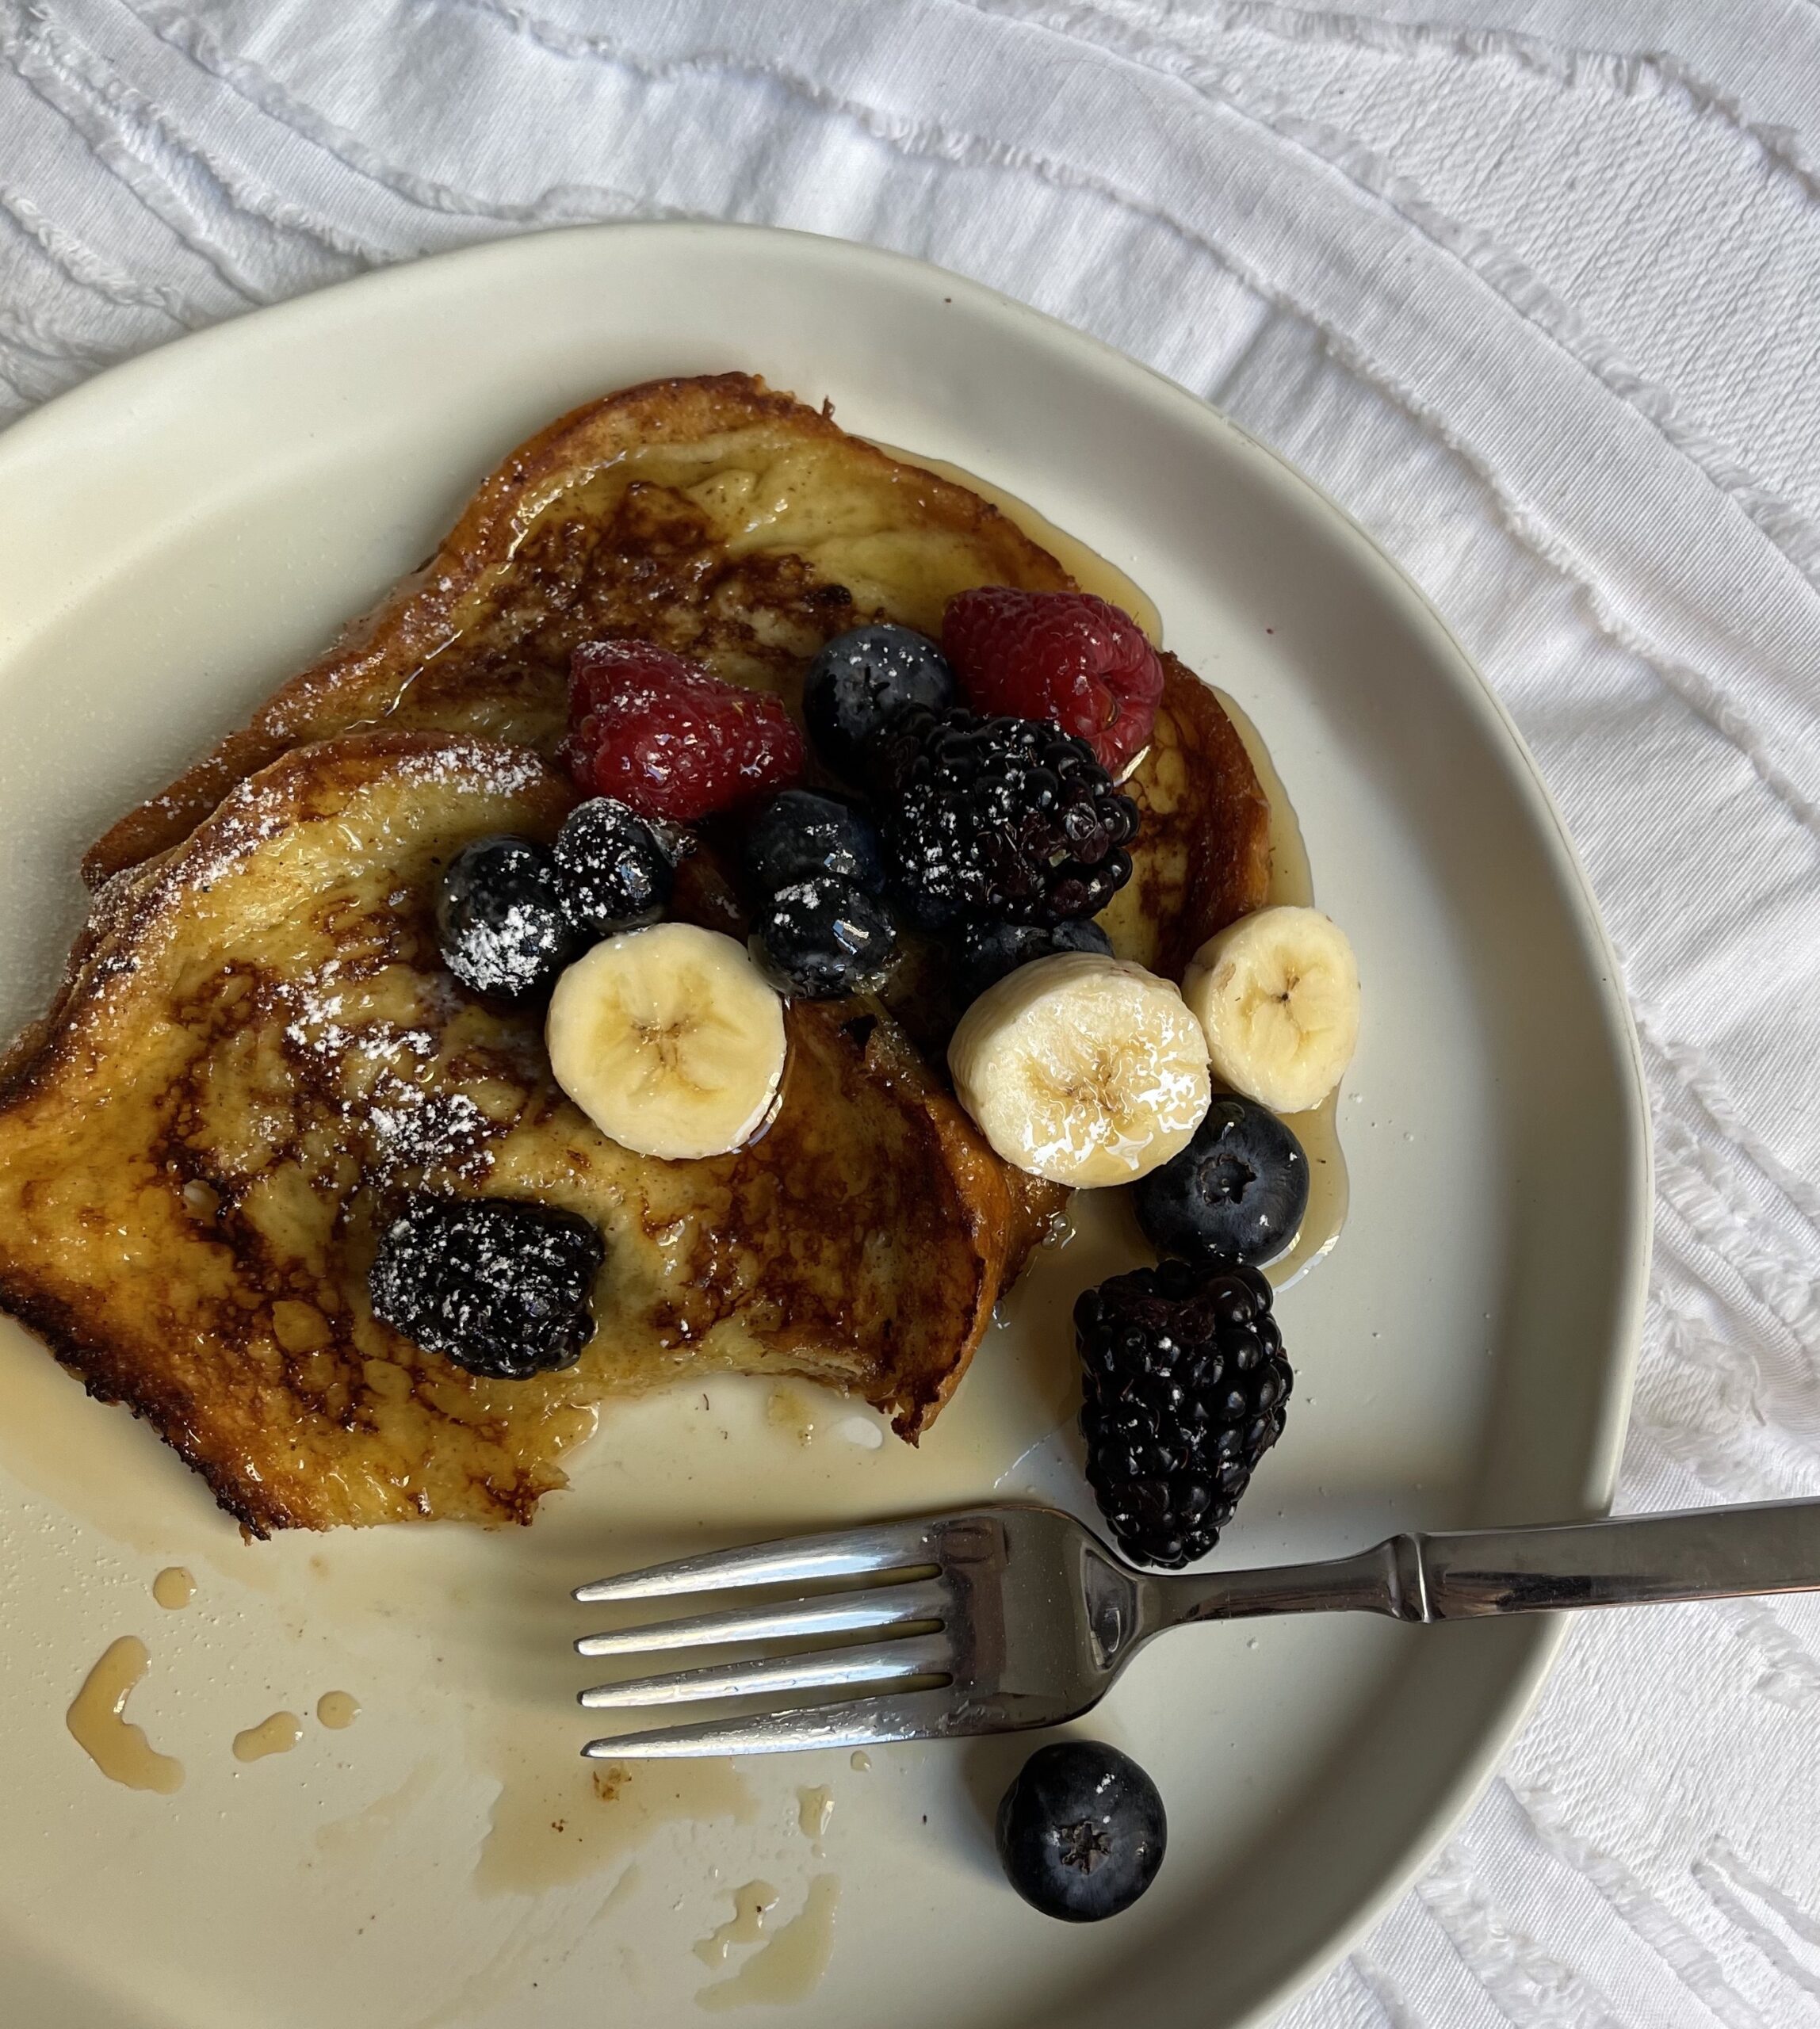 check out this challah french toast recipe next time you need a cozy weekend breakfast idea!